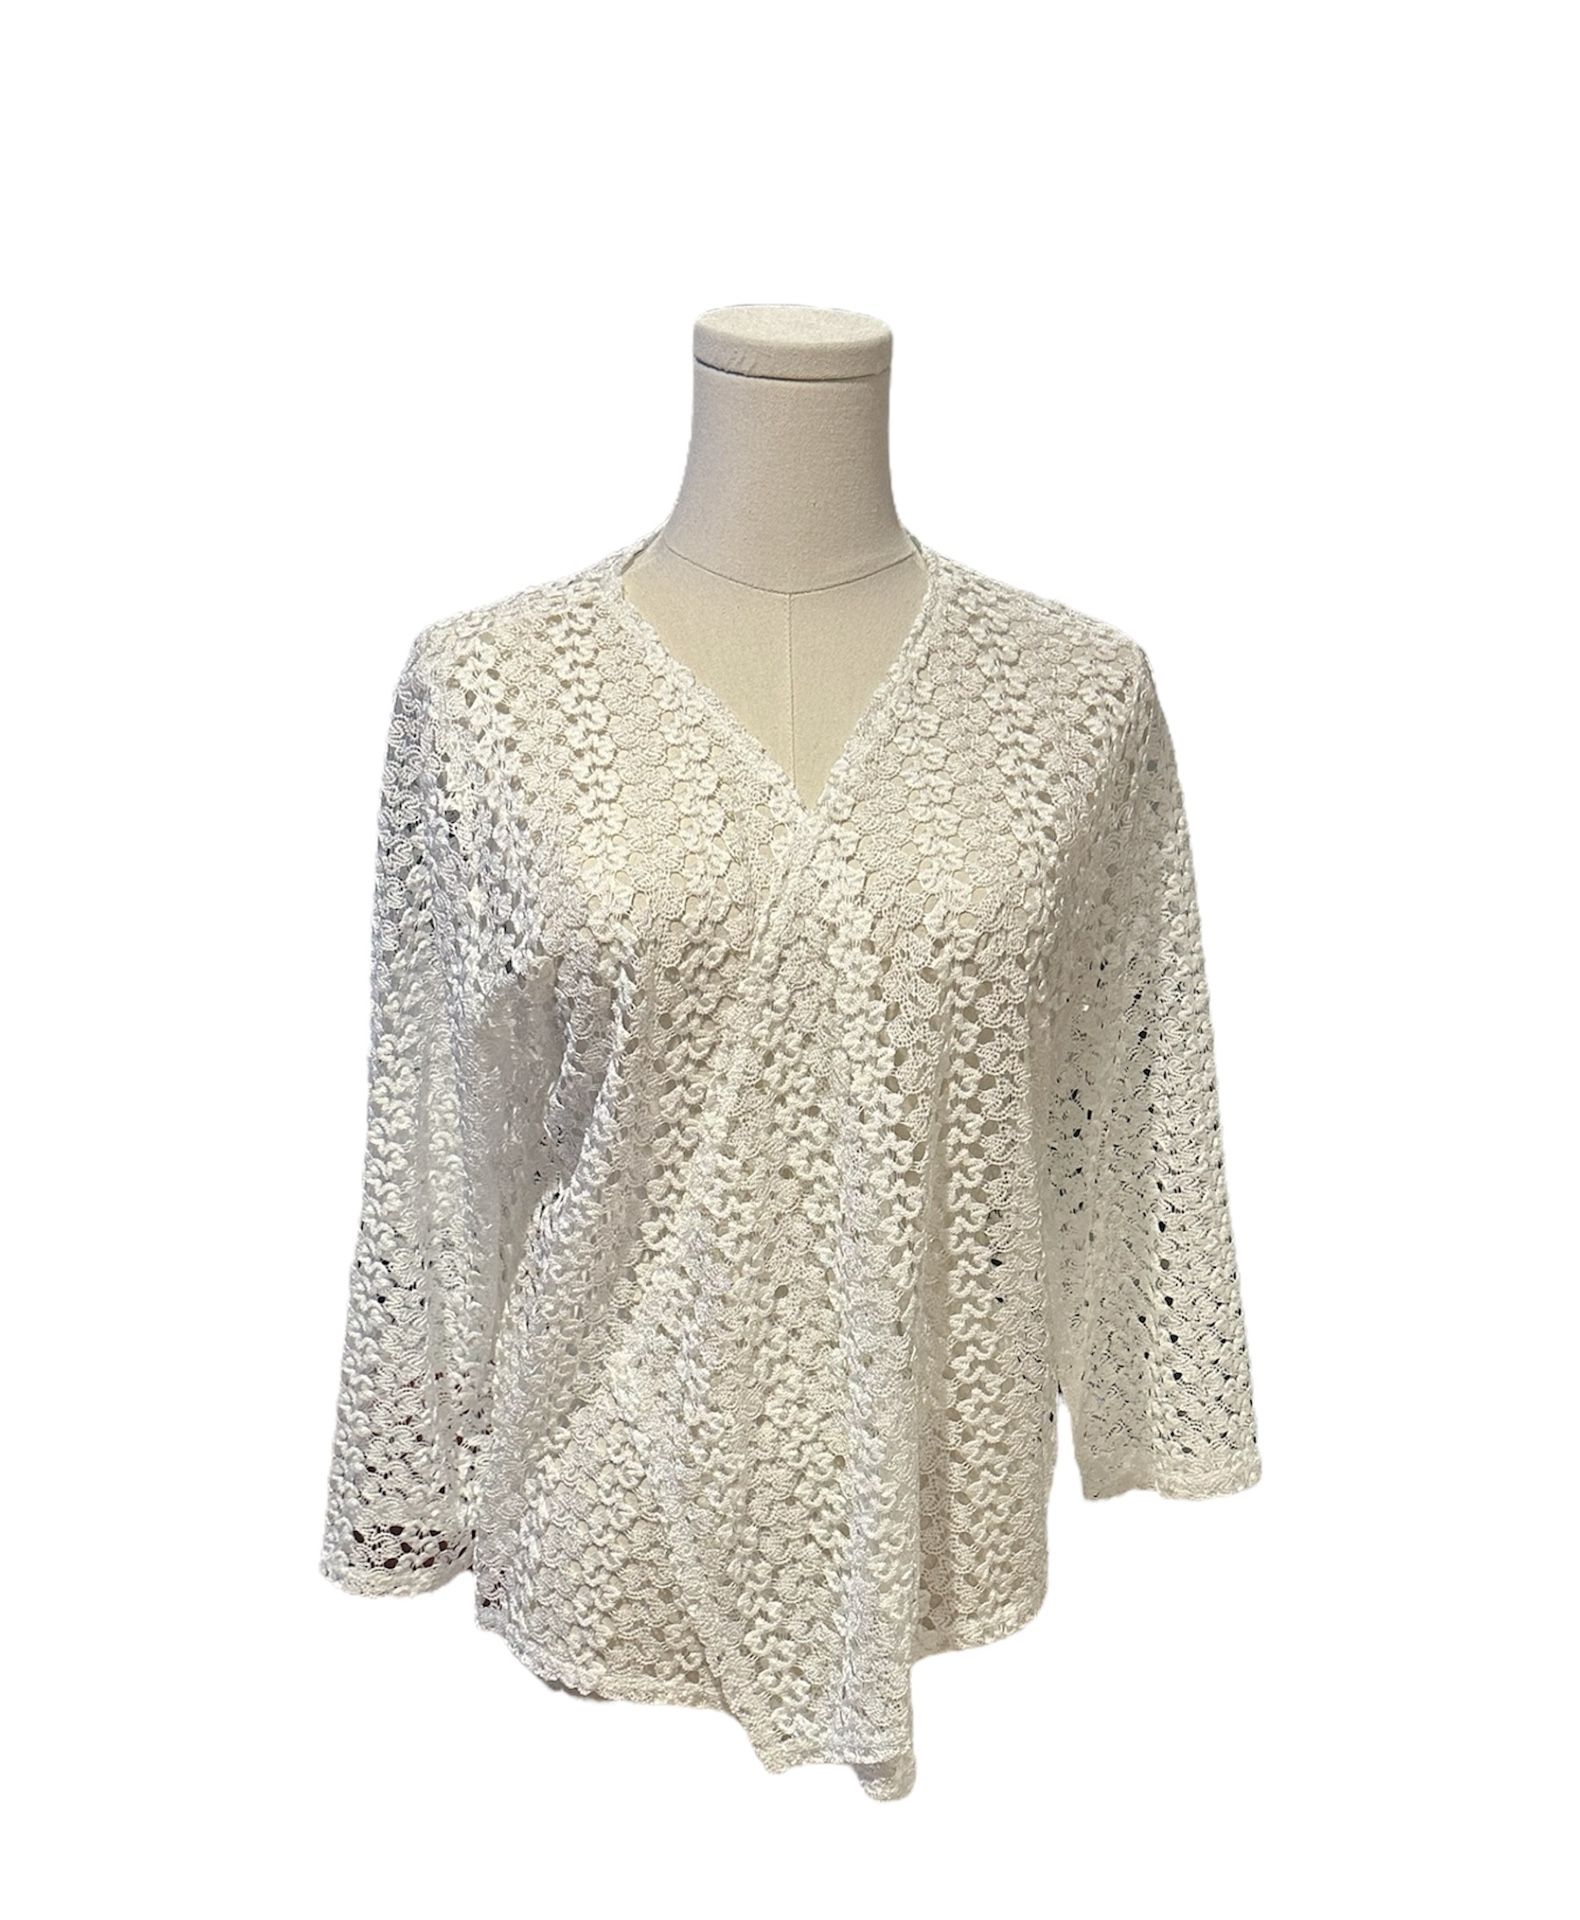 Onyx Apparel White Lace Knit Open Short Cardigan w/ 3/4 Sleeves Size Large